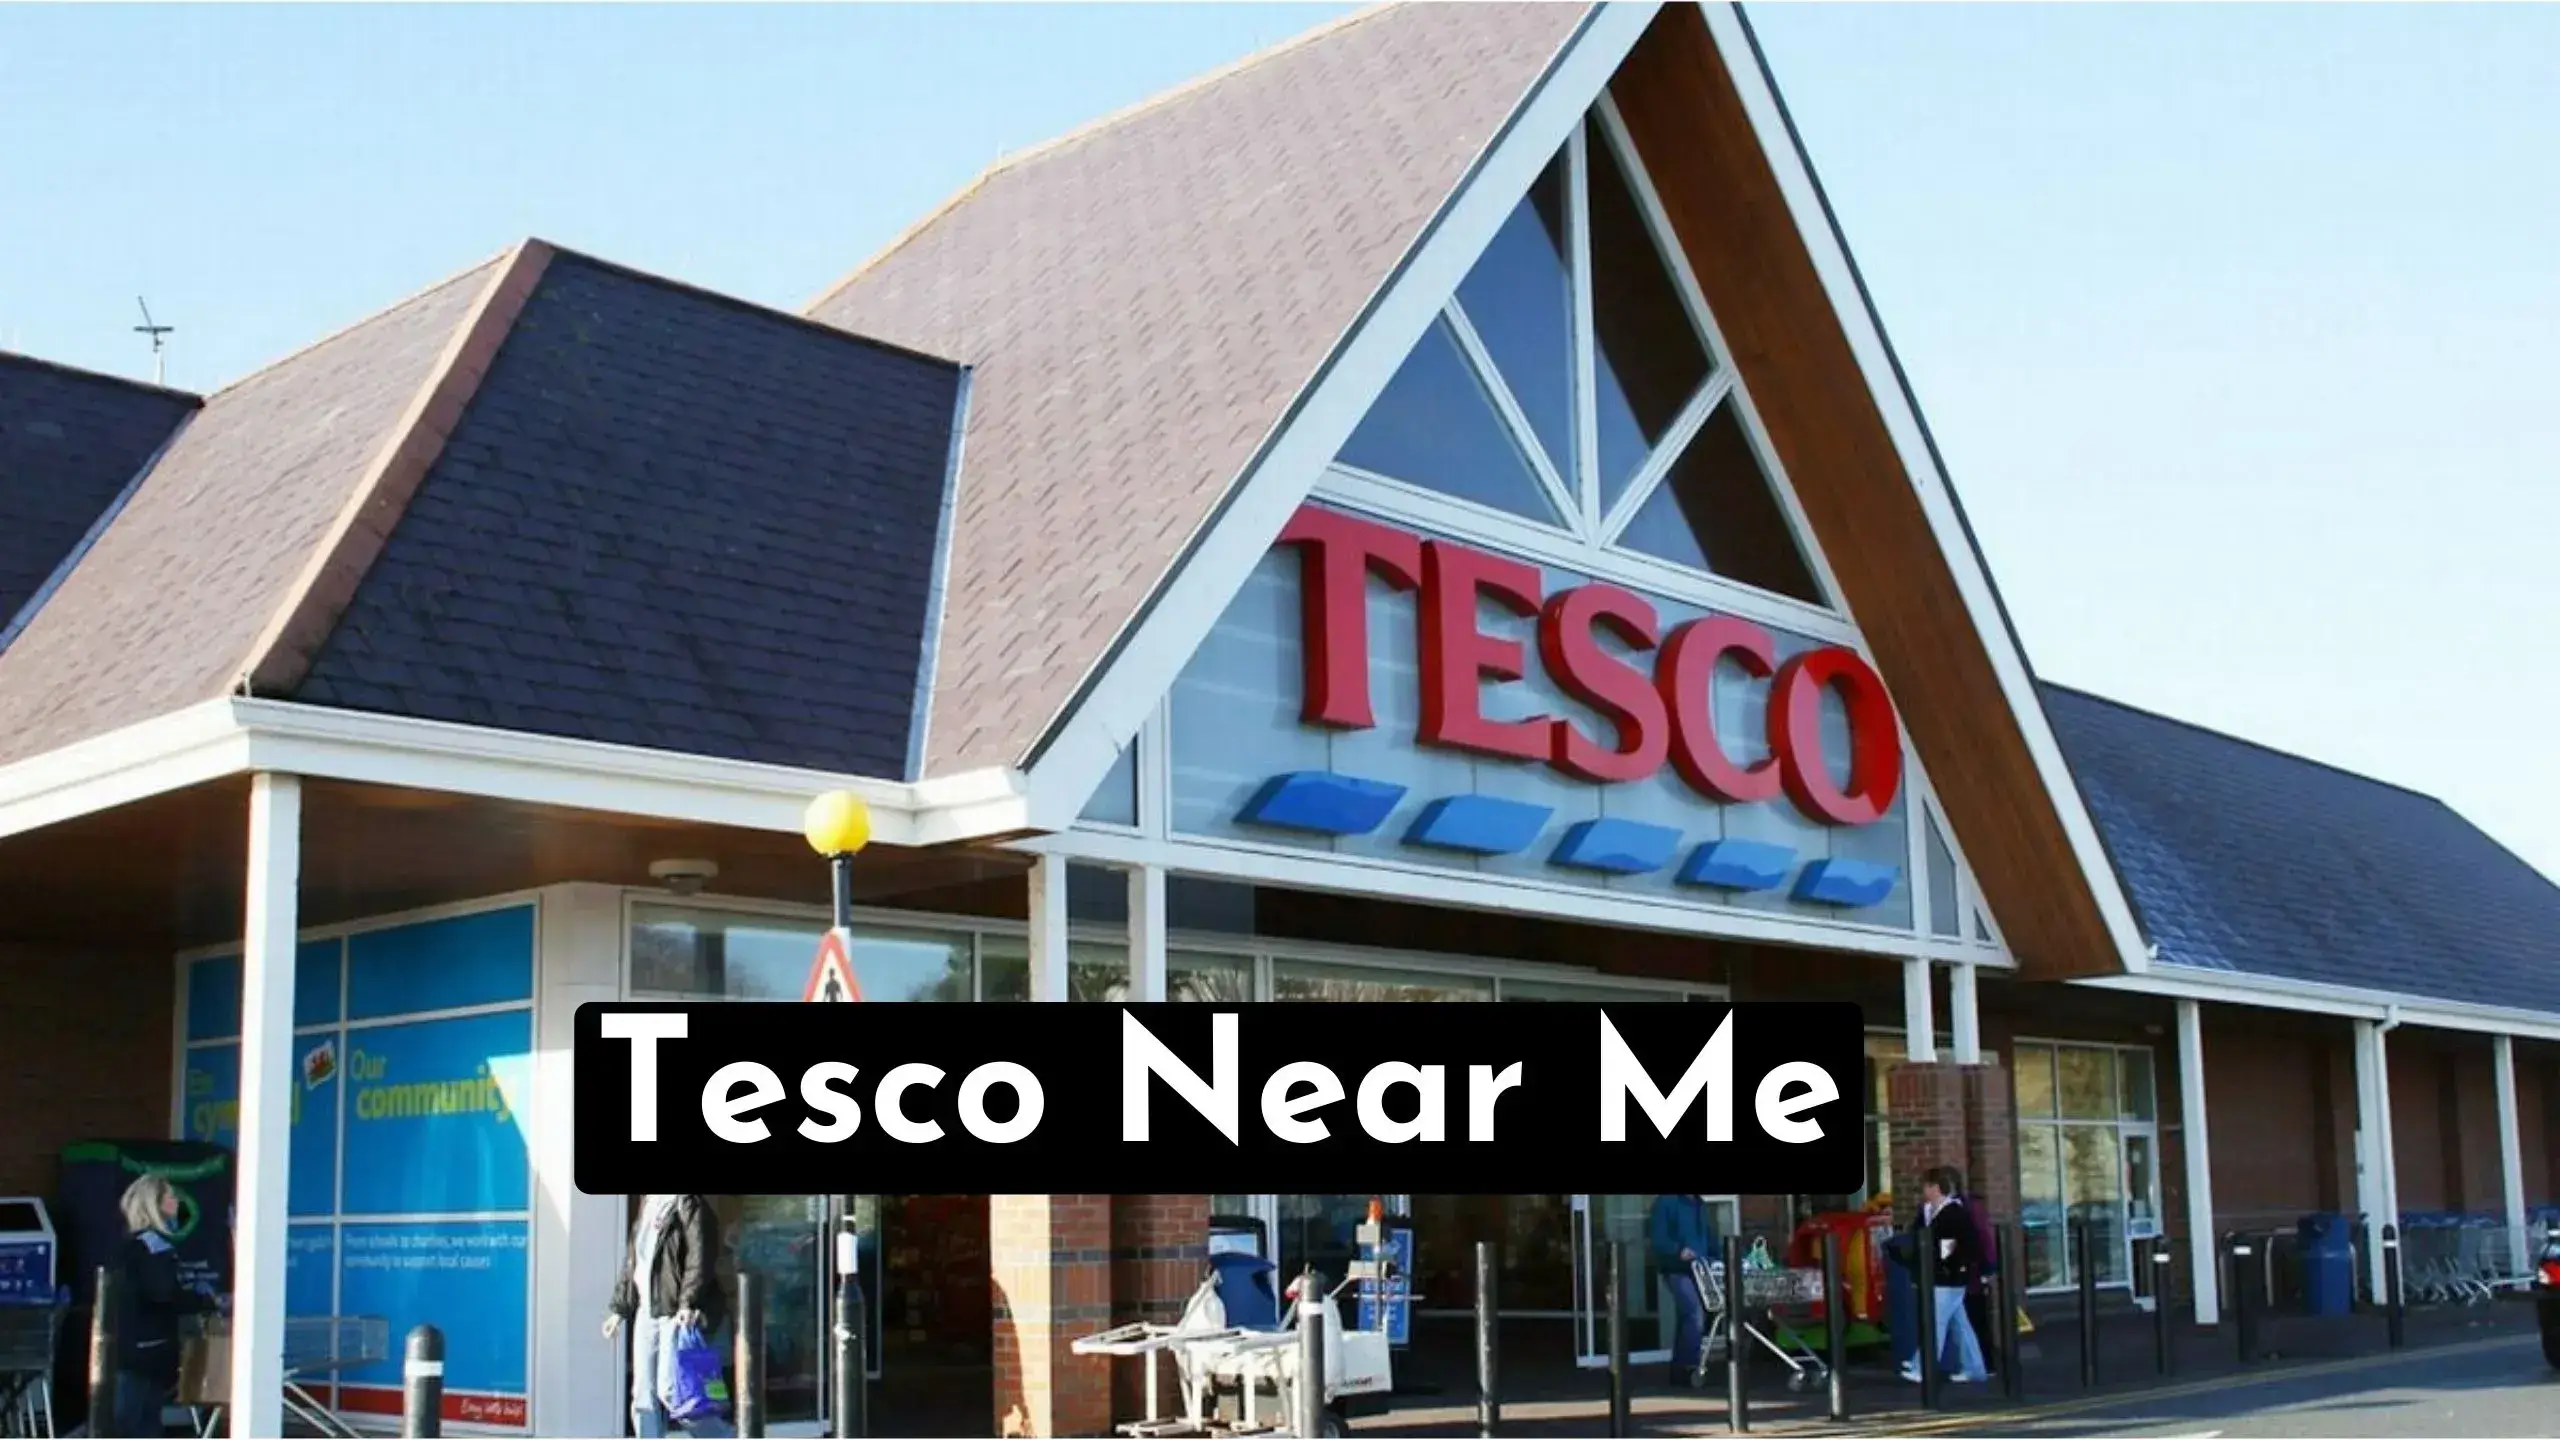 Find your closest Tesco Superstore with Tesco Near Me guide. Enjoy convenience, variety, and online shopping options.